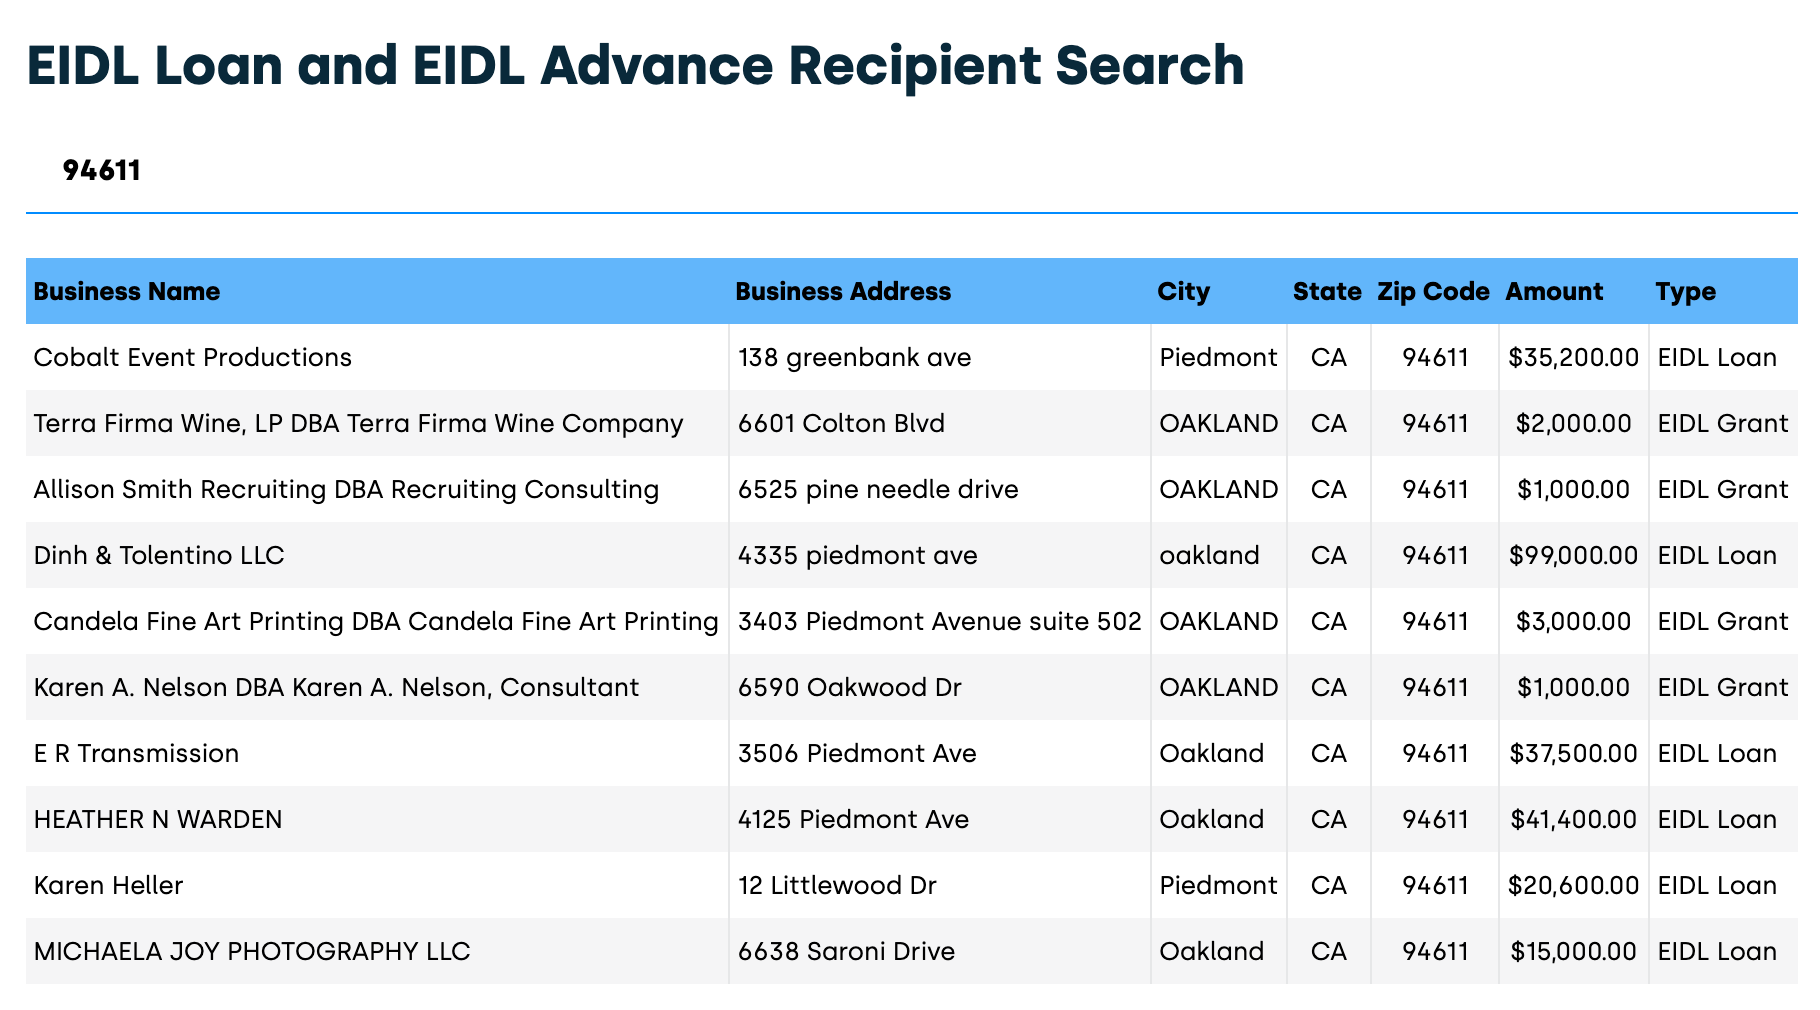 https://static.helloskip.com/blog/2021/05/EIDL-loan-and-grant-recipient-search.png